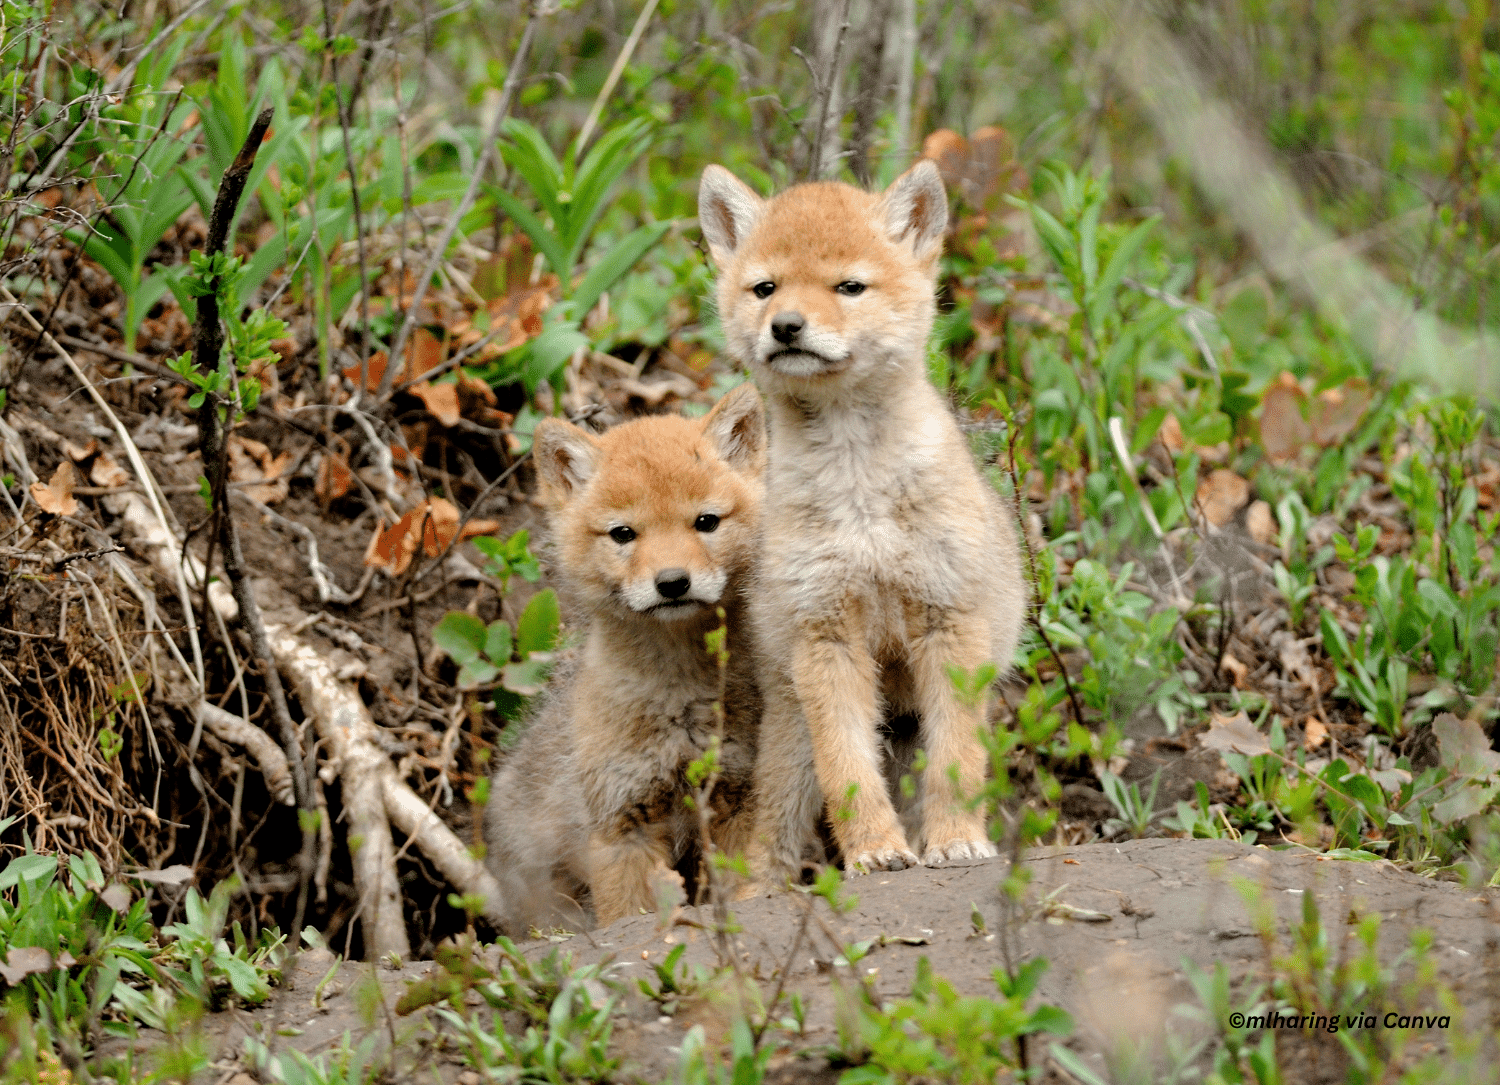 horizontal photo of two coyote pups both sitting in some foliage.